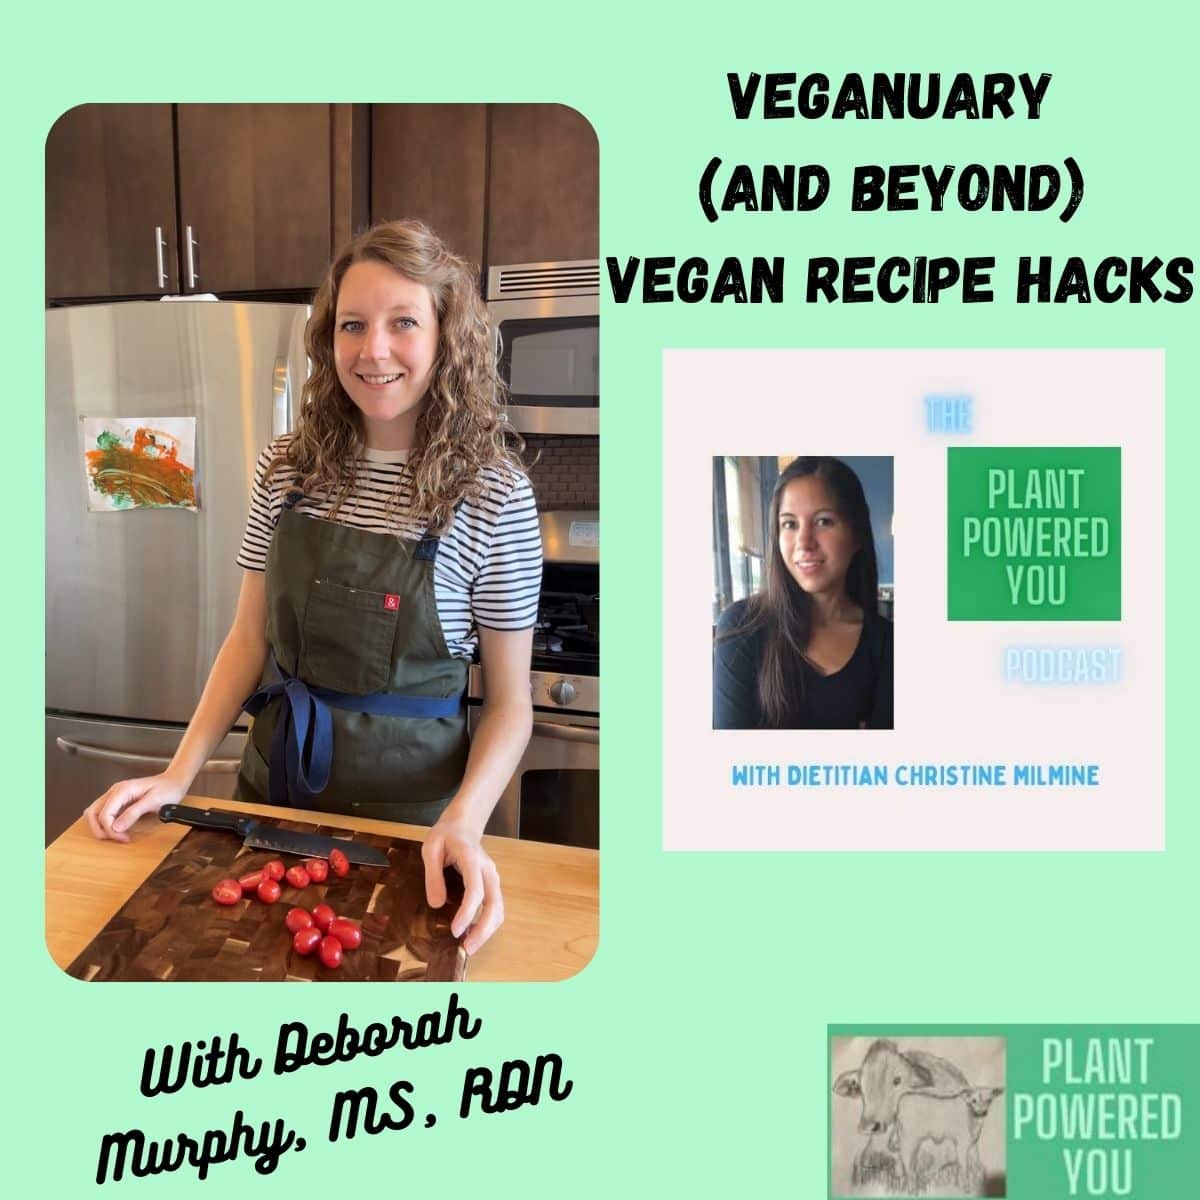 Picture of Deborah Murphy with a box beside that has a Picture of Christine and says: The Plant Powered You Podcast with Dietitian Christine MIlmine. Title Reads: Veganuary (and beyond) Vegan Recipe Hacks with Deborah Murphy, MS, RDN 